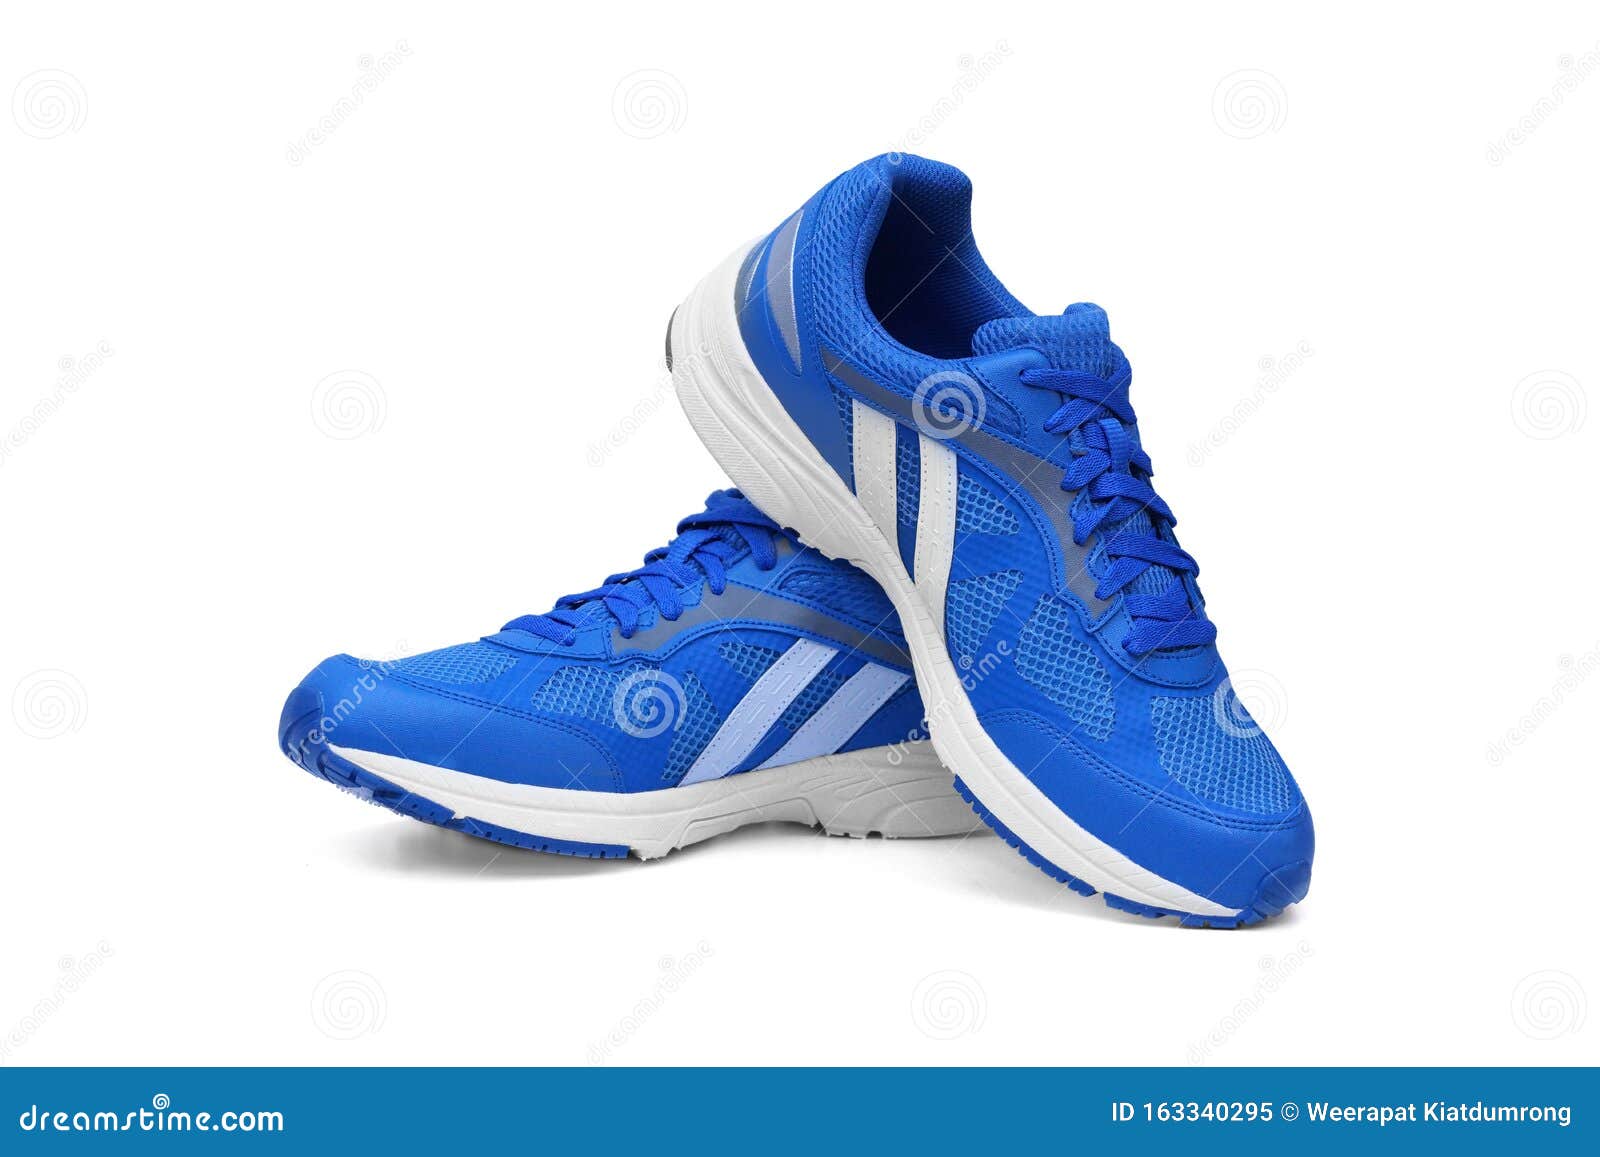 Running Shoes in Blue Color Stock Image - Image of shoe, clothing ...